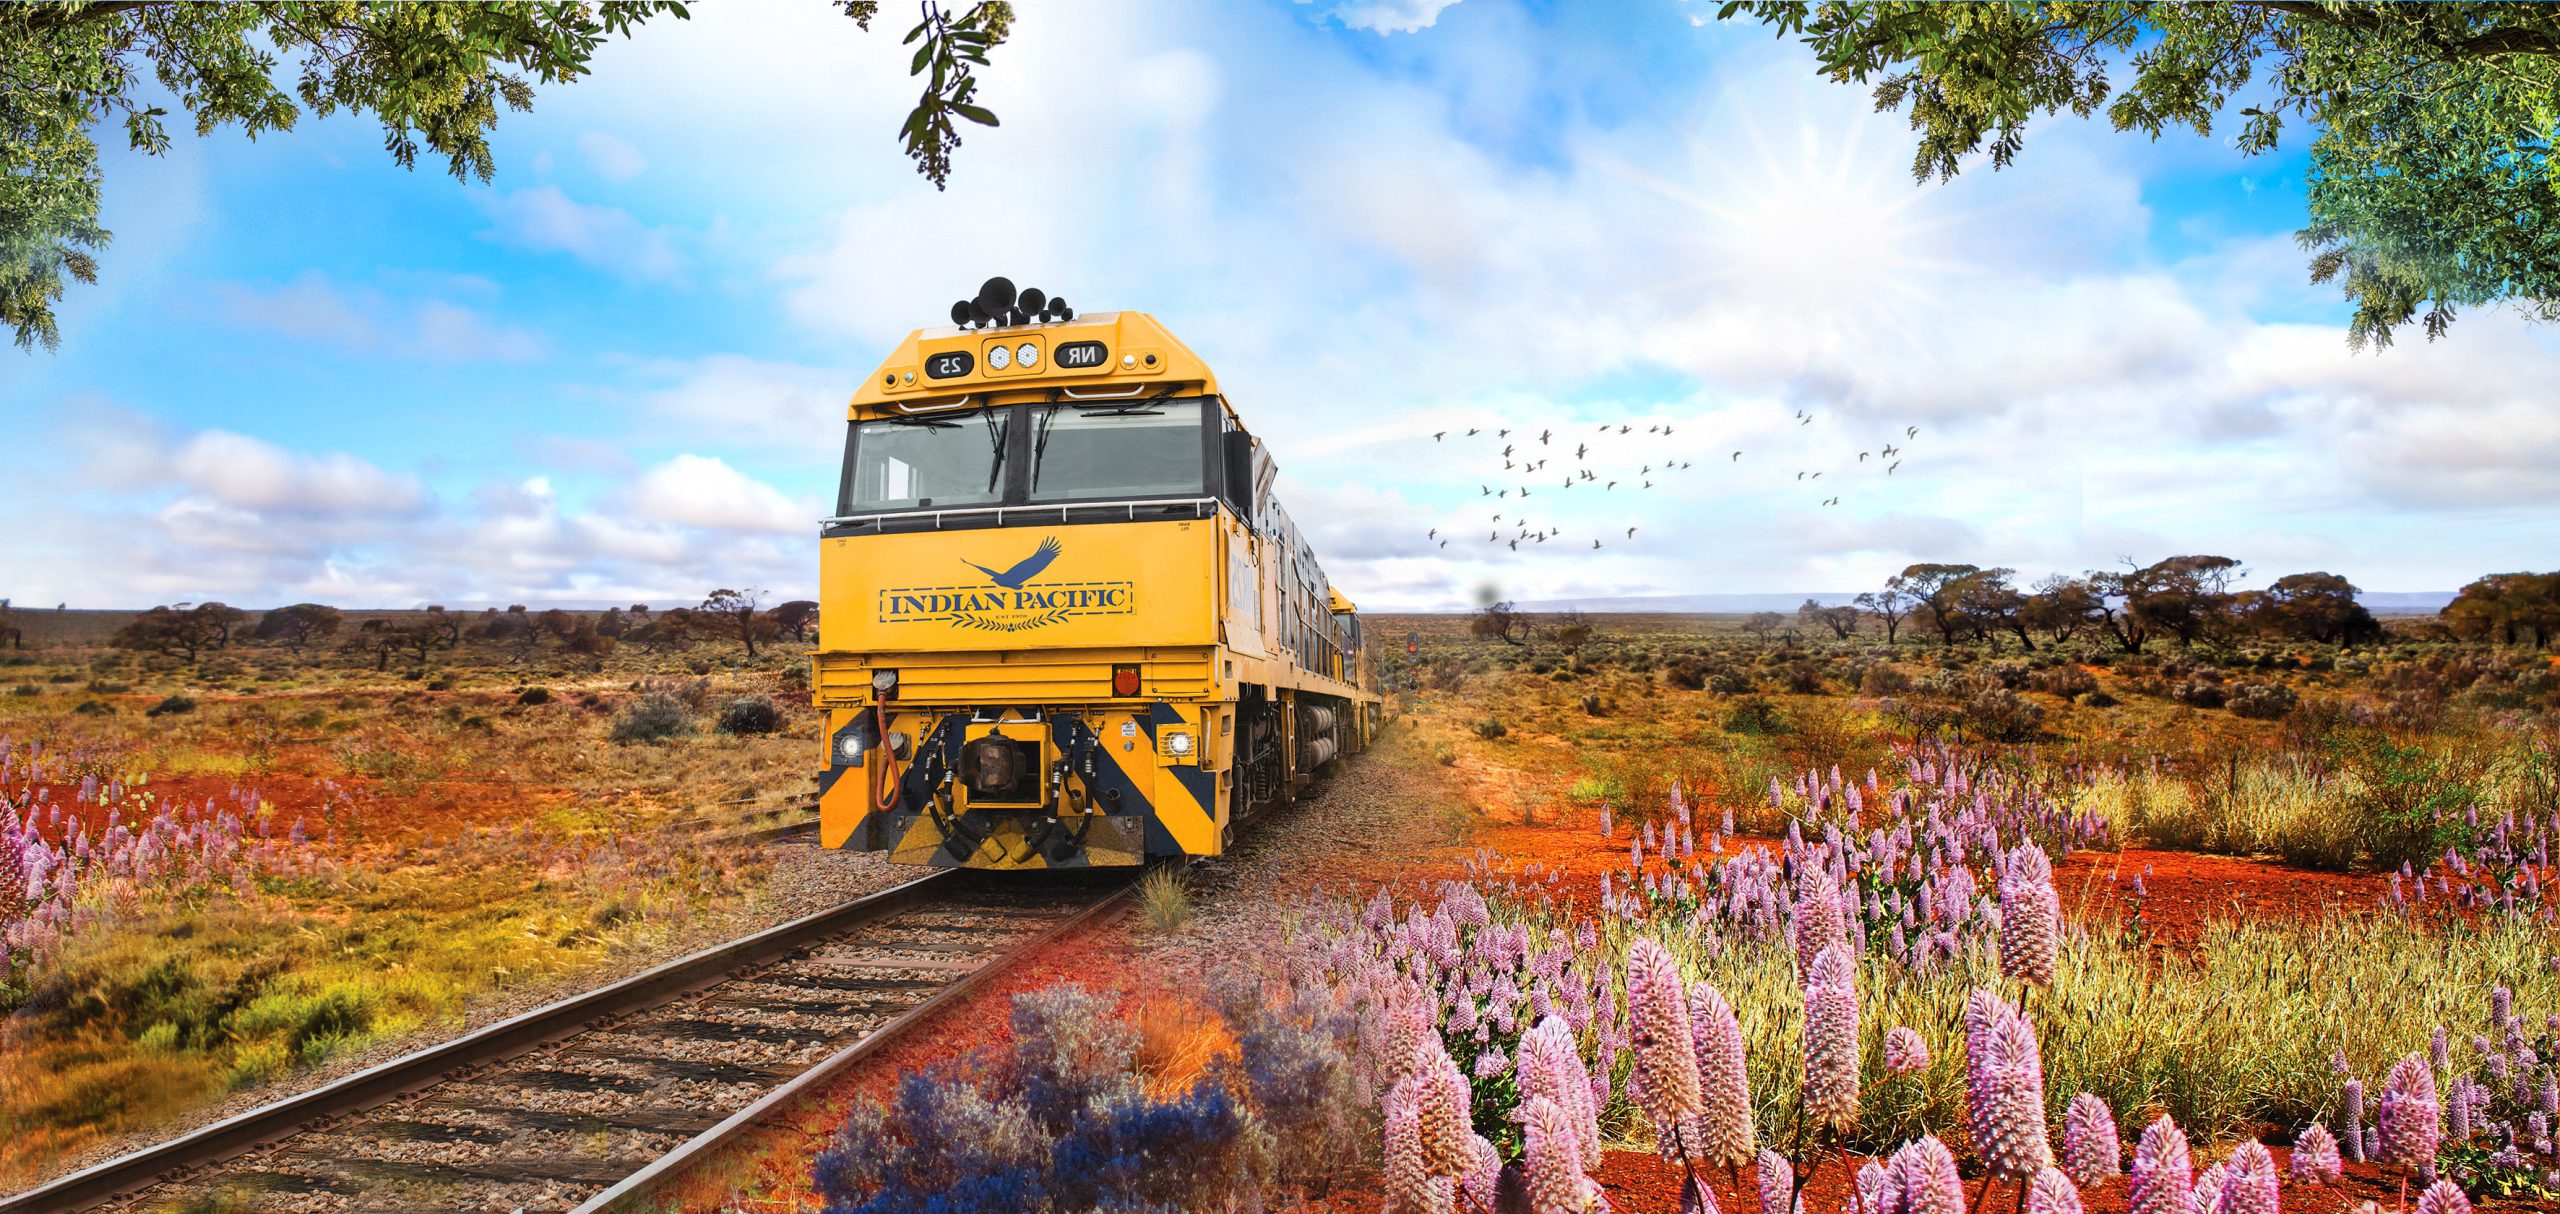 Enjoy a 22-night, all-inclusive cruise & Indian Pacific rail adventure with prices starting from $455 pp per night